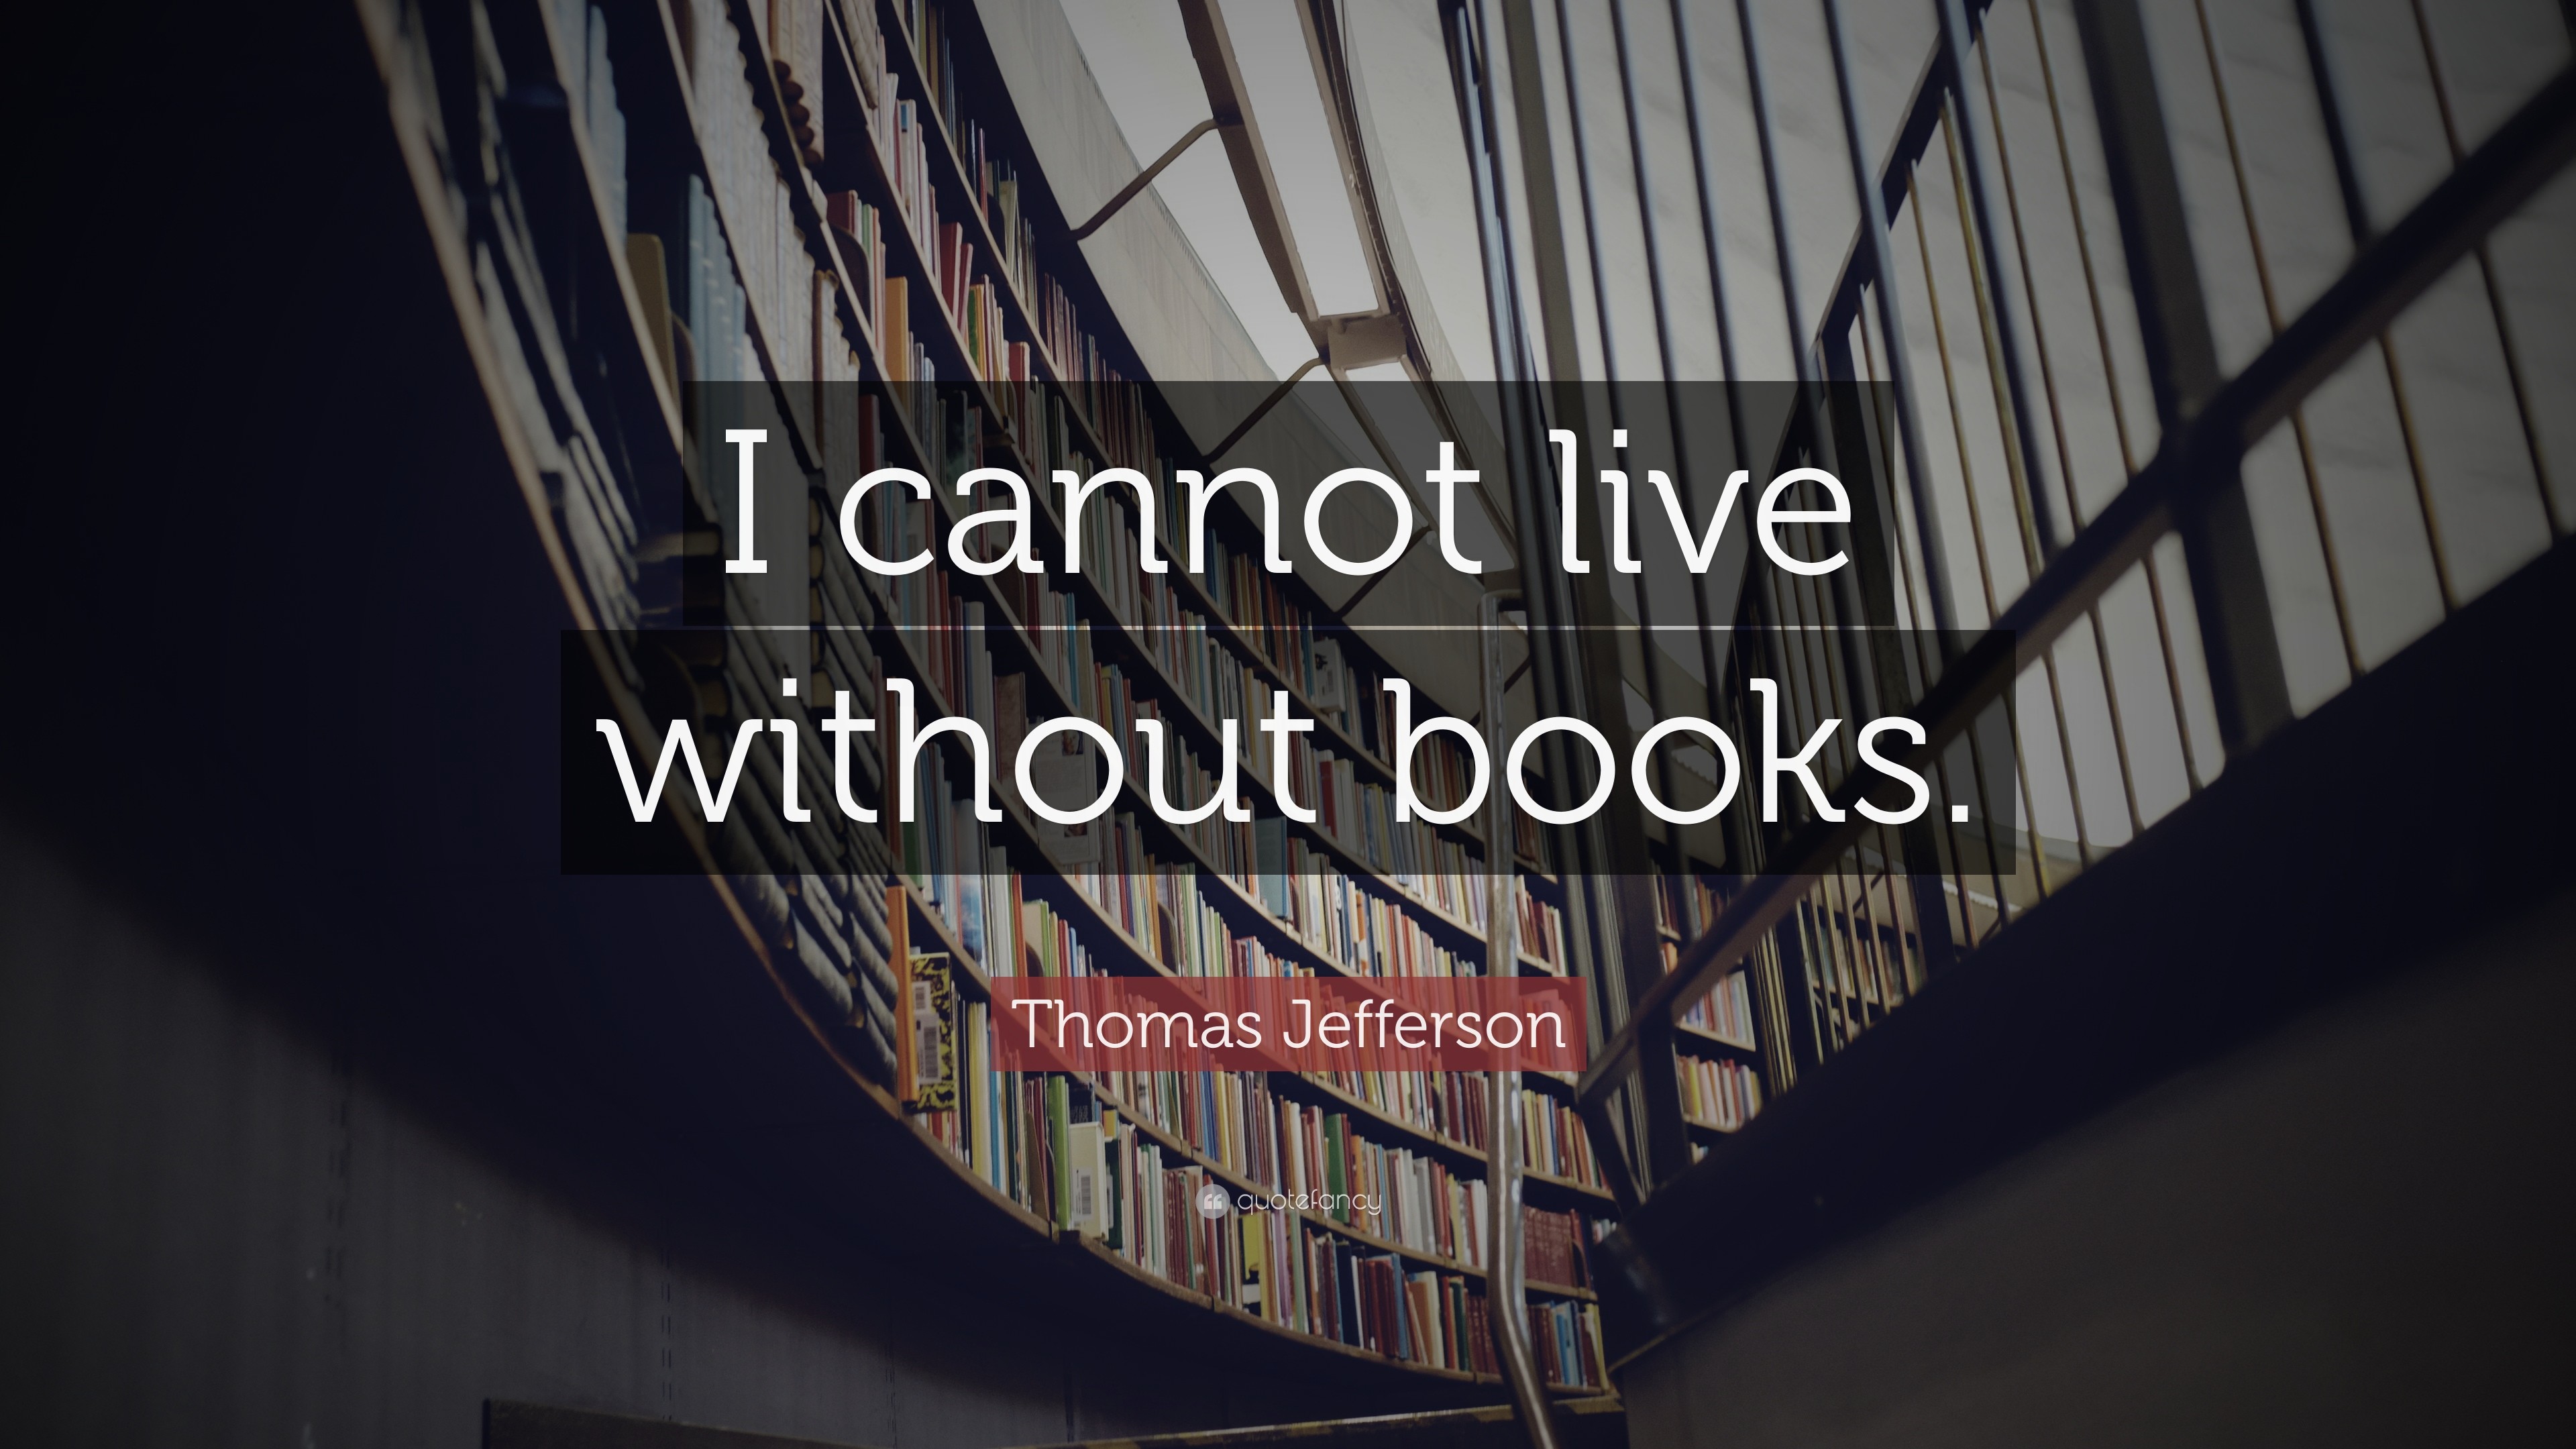 3840x2160 Thomas Jefferson Quote: “I cannot live without books.”